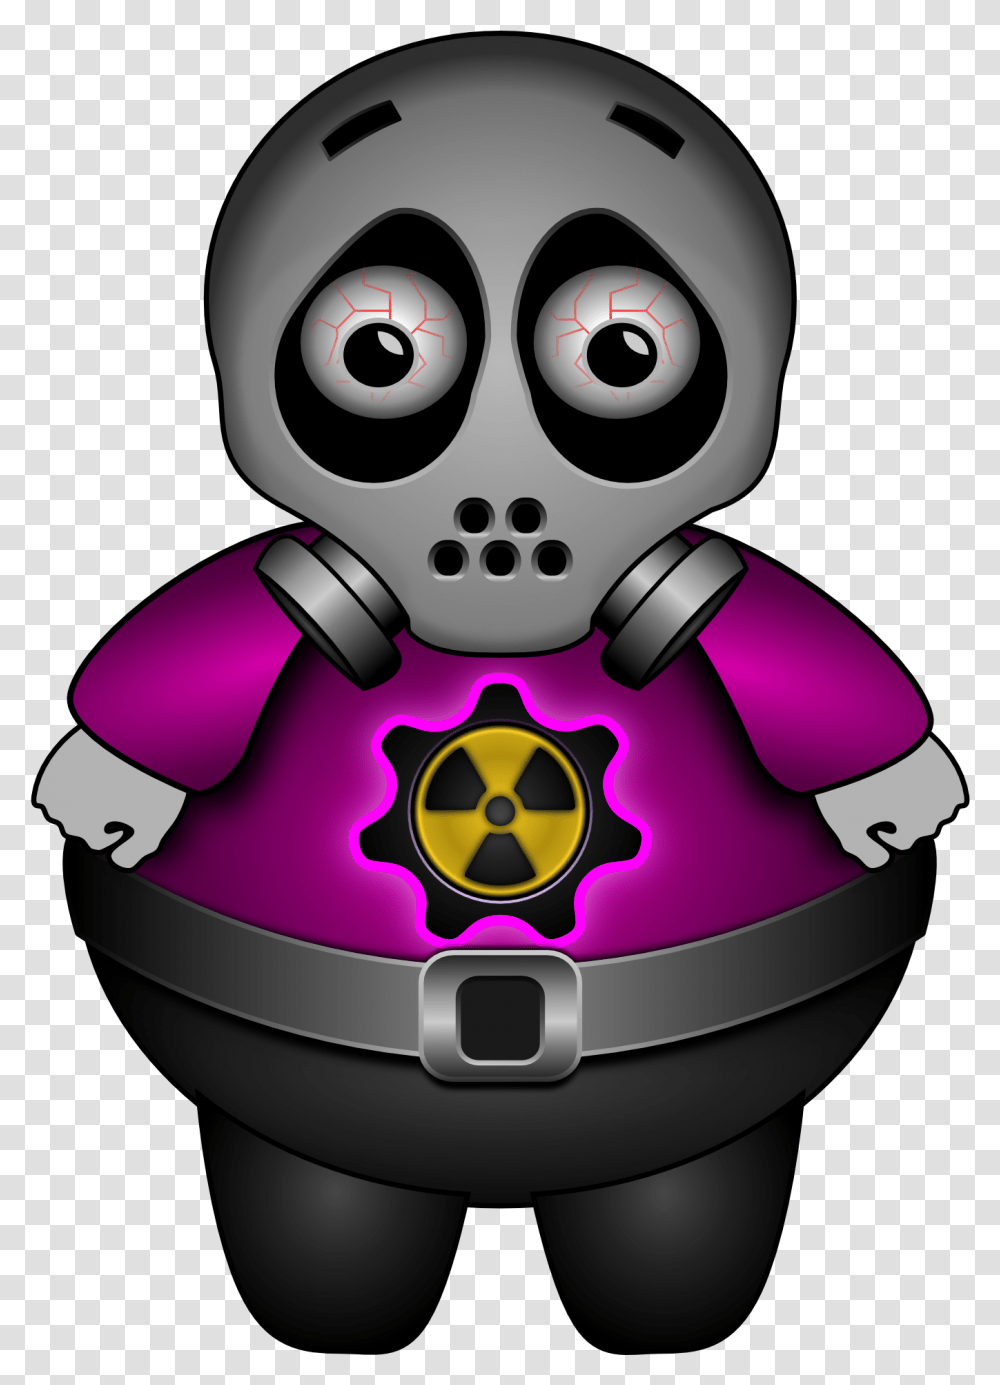 Alien Sad Gas Mask Atomic Radioactive Contaminated Outer Space Memory Game, Robot, Toy, Helmet Transparent Png